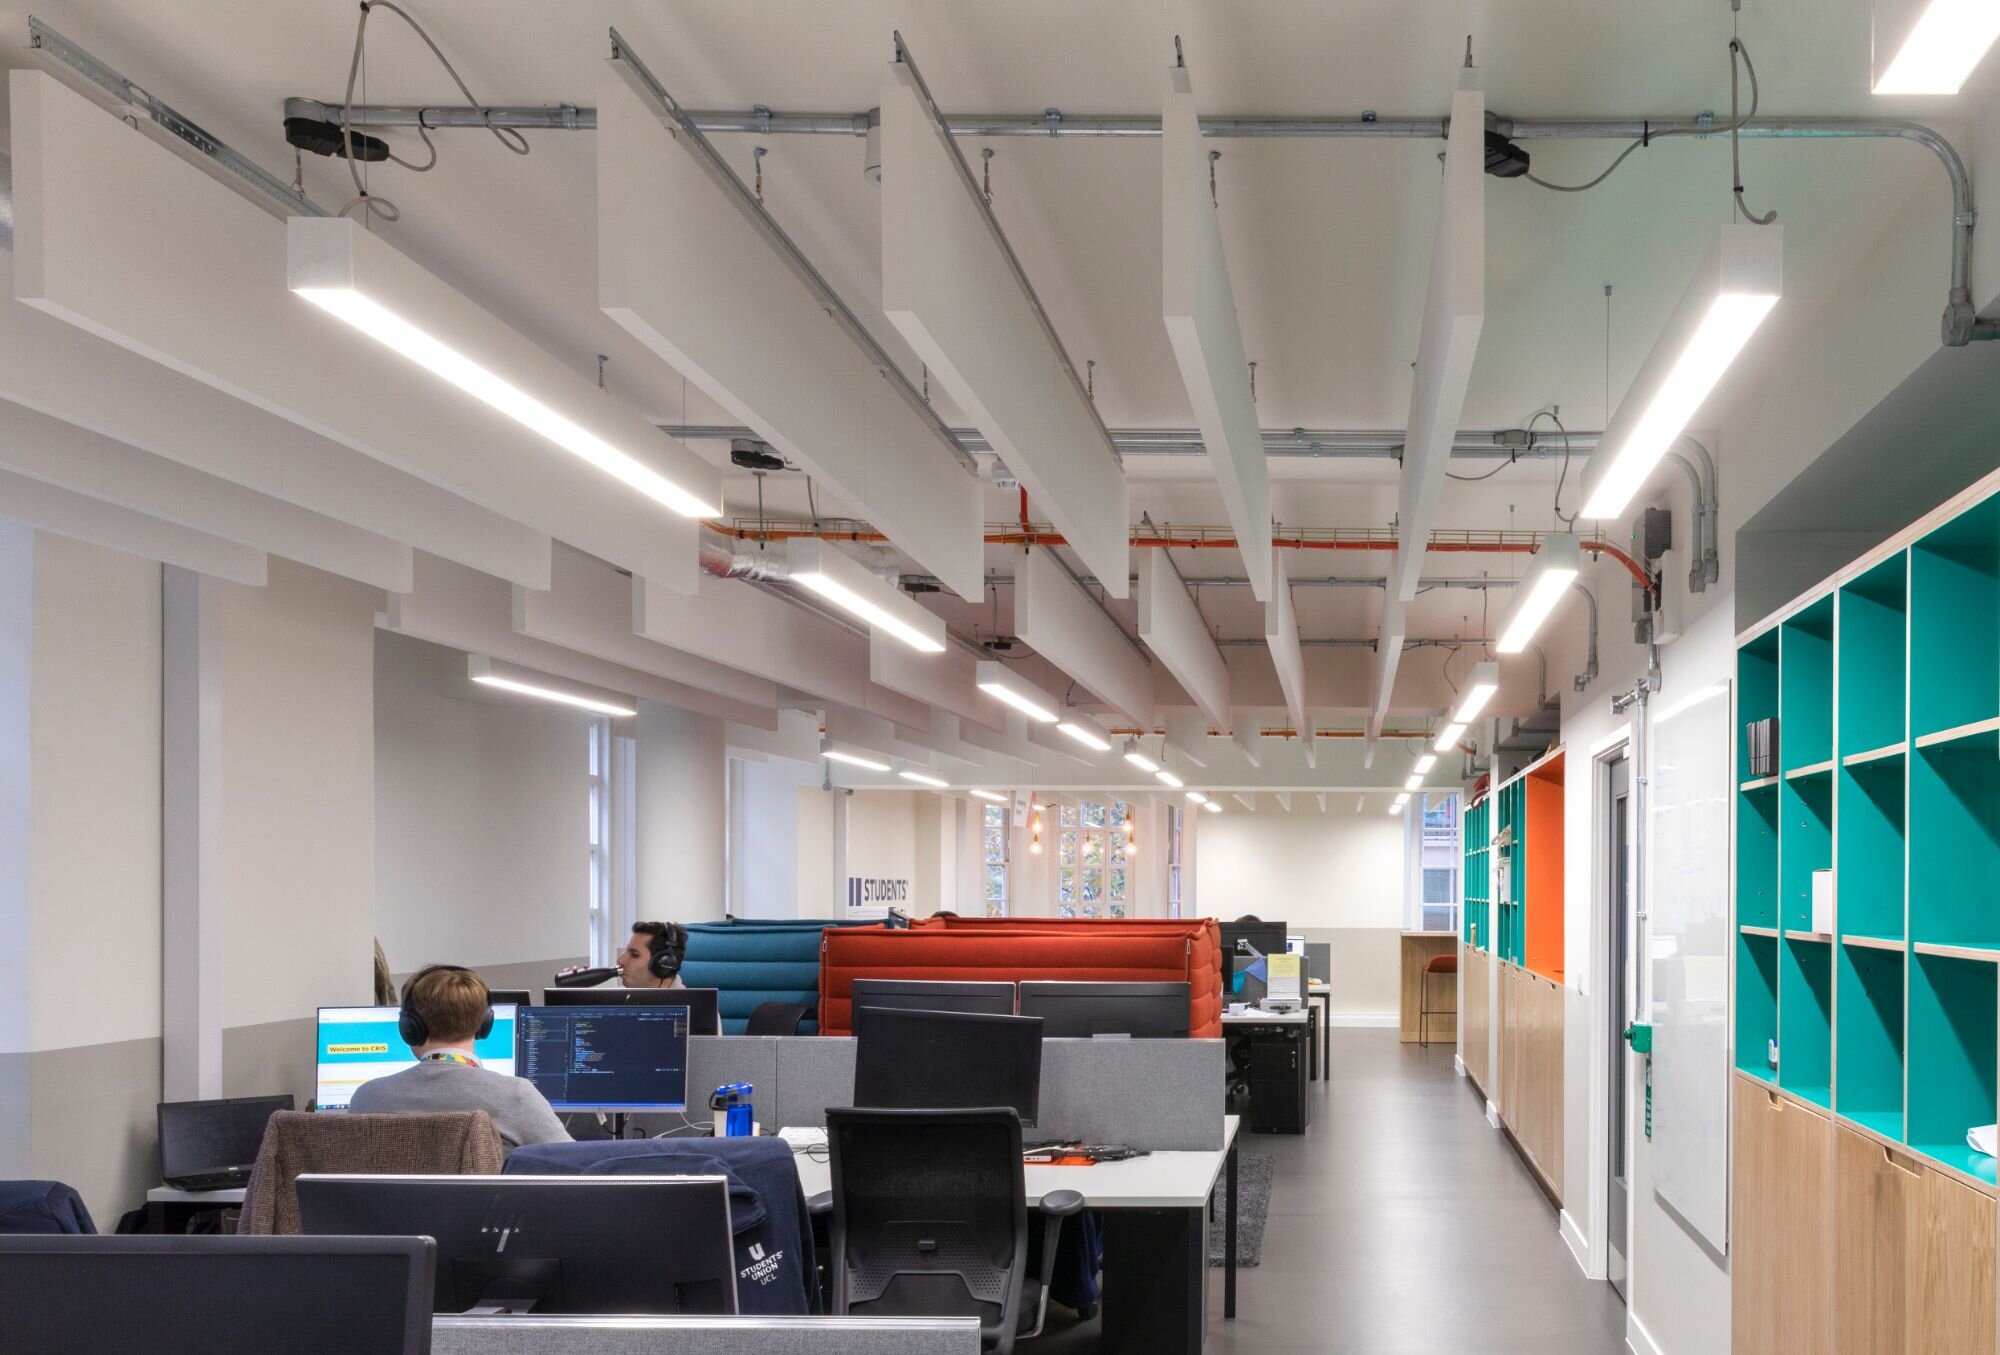 Track lighting for an education space CAT B fitout at UCL, 25 Gordon Street, London.